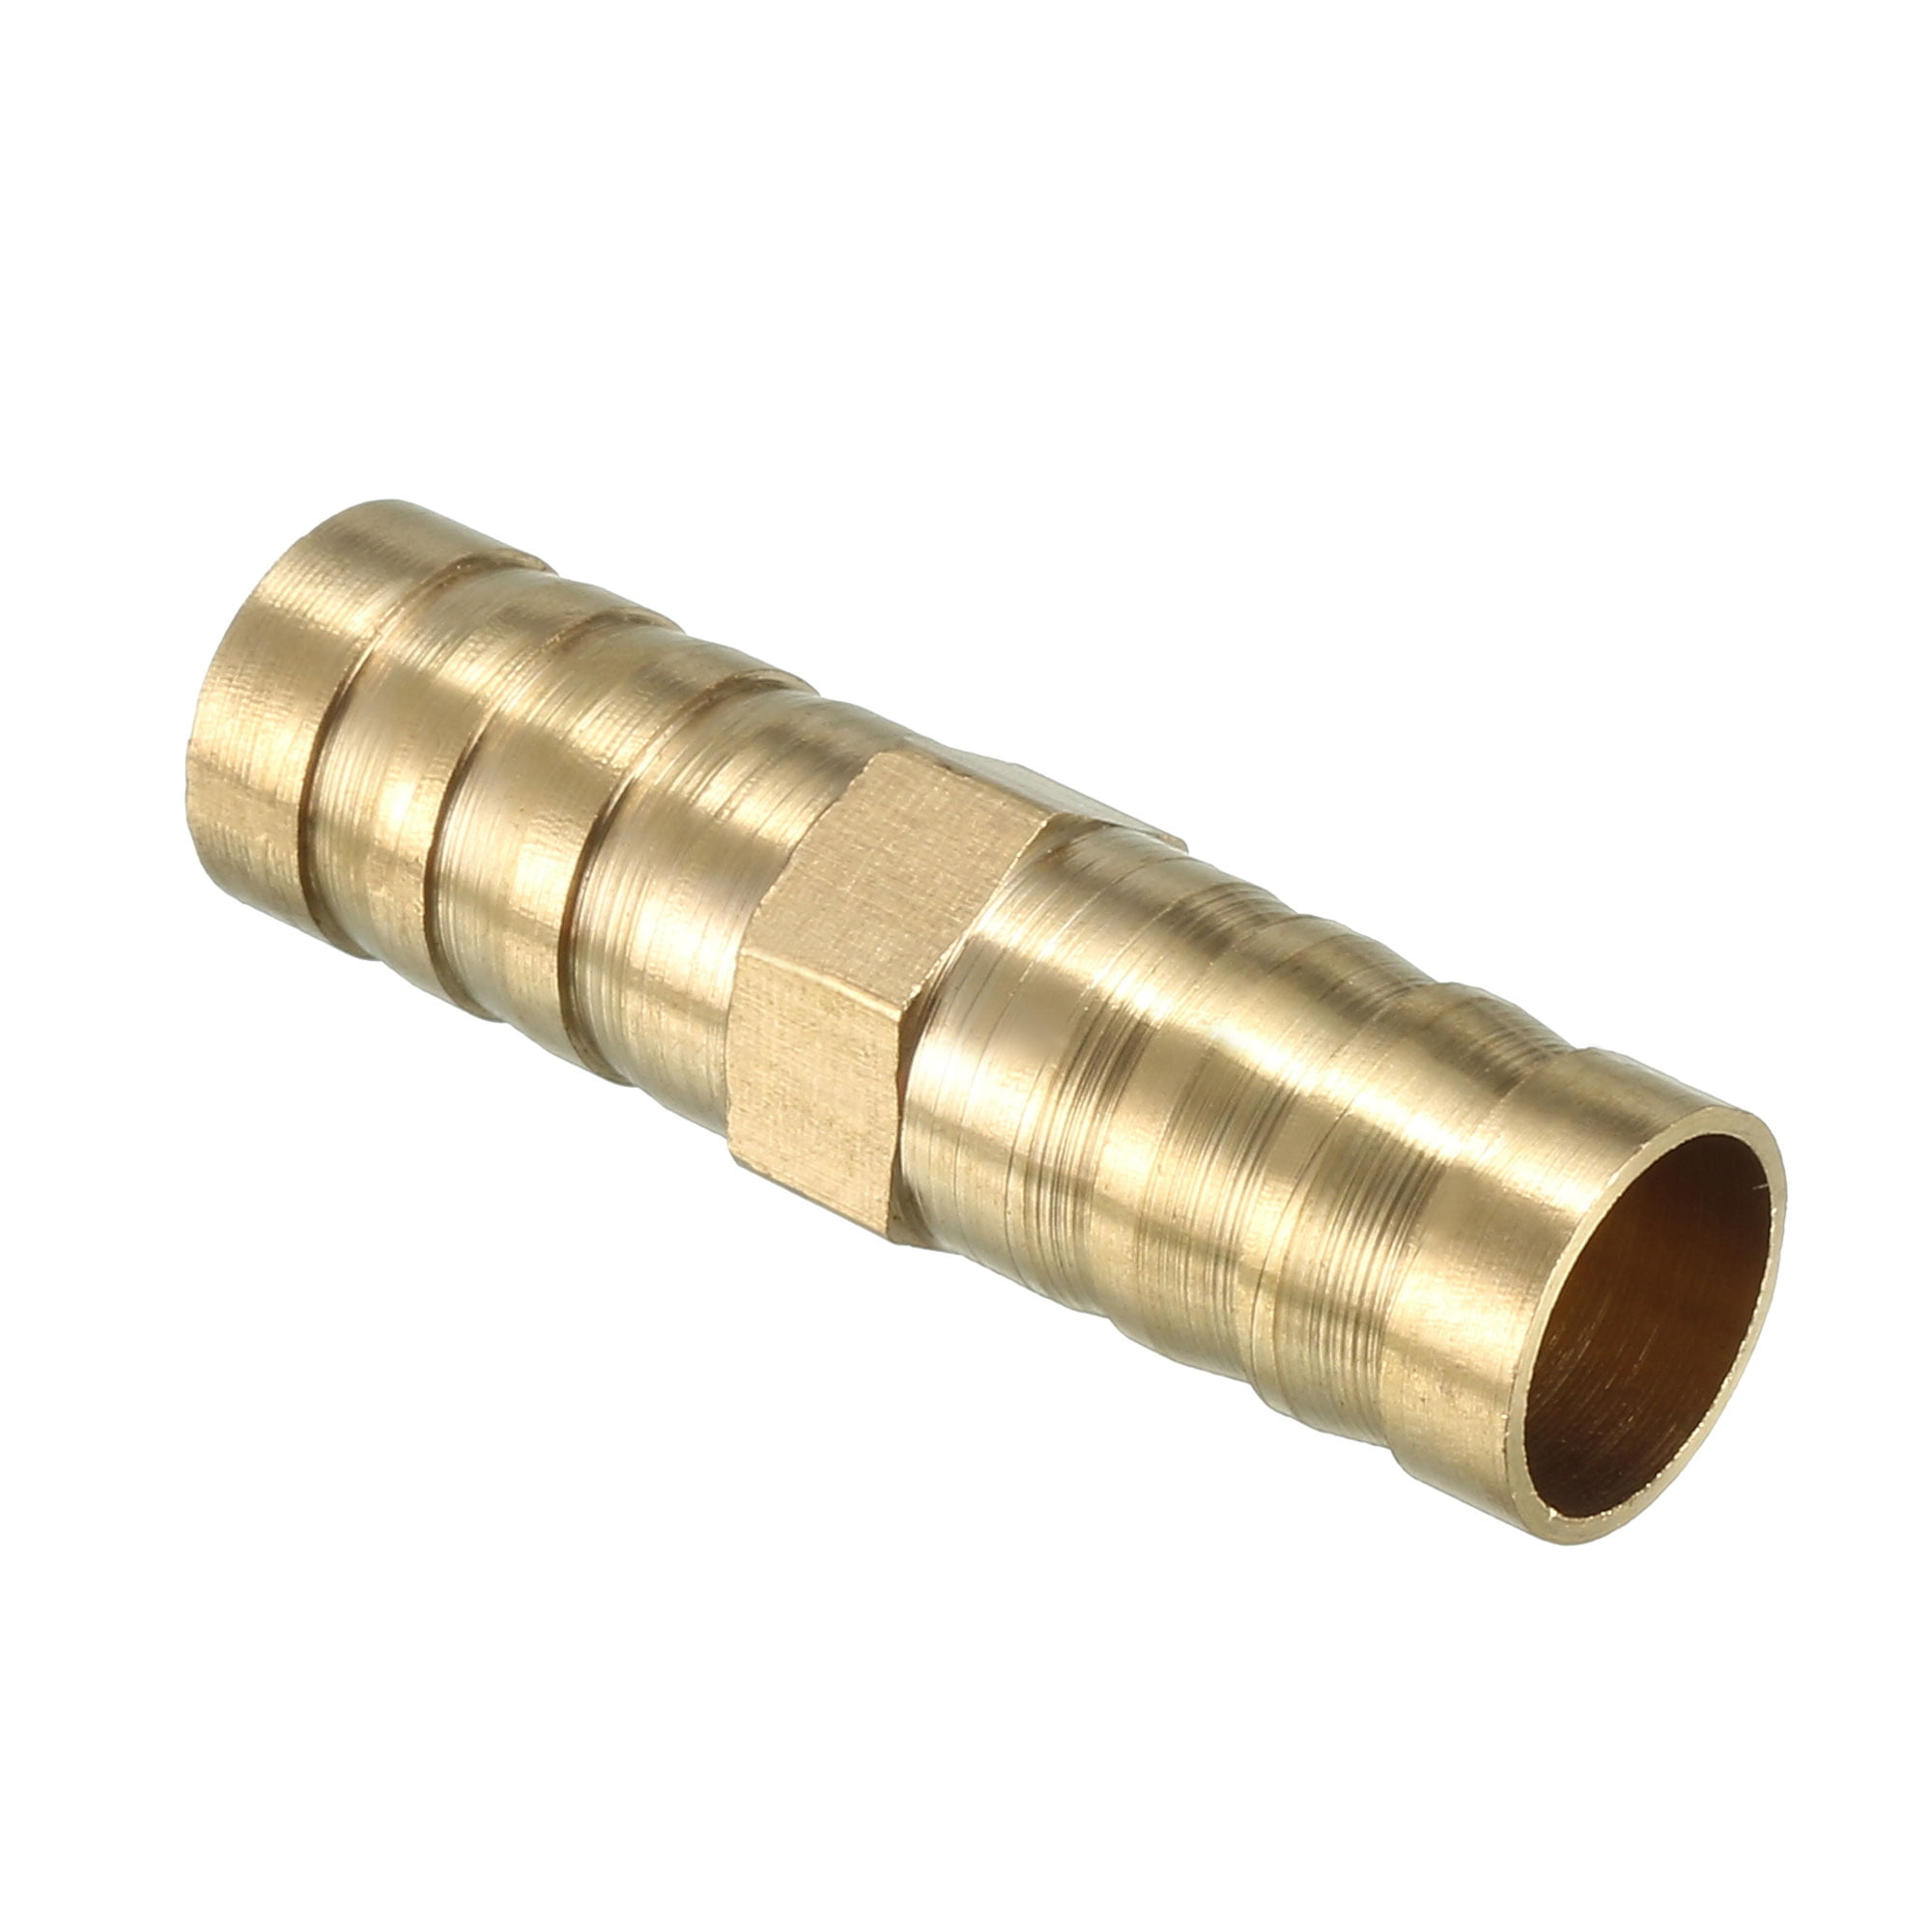 10 Pieces Brass Straight 12mm Barb Fuel Hose Joiner Air Gas Water Hose Connector 